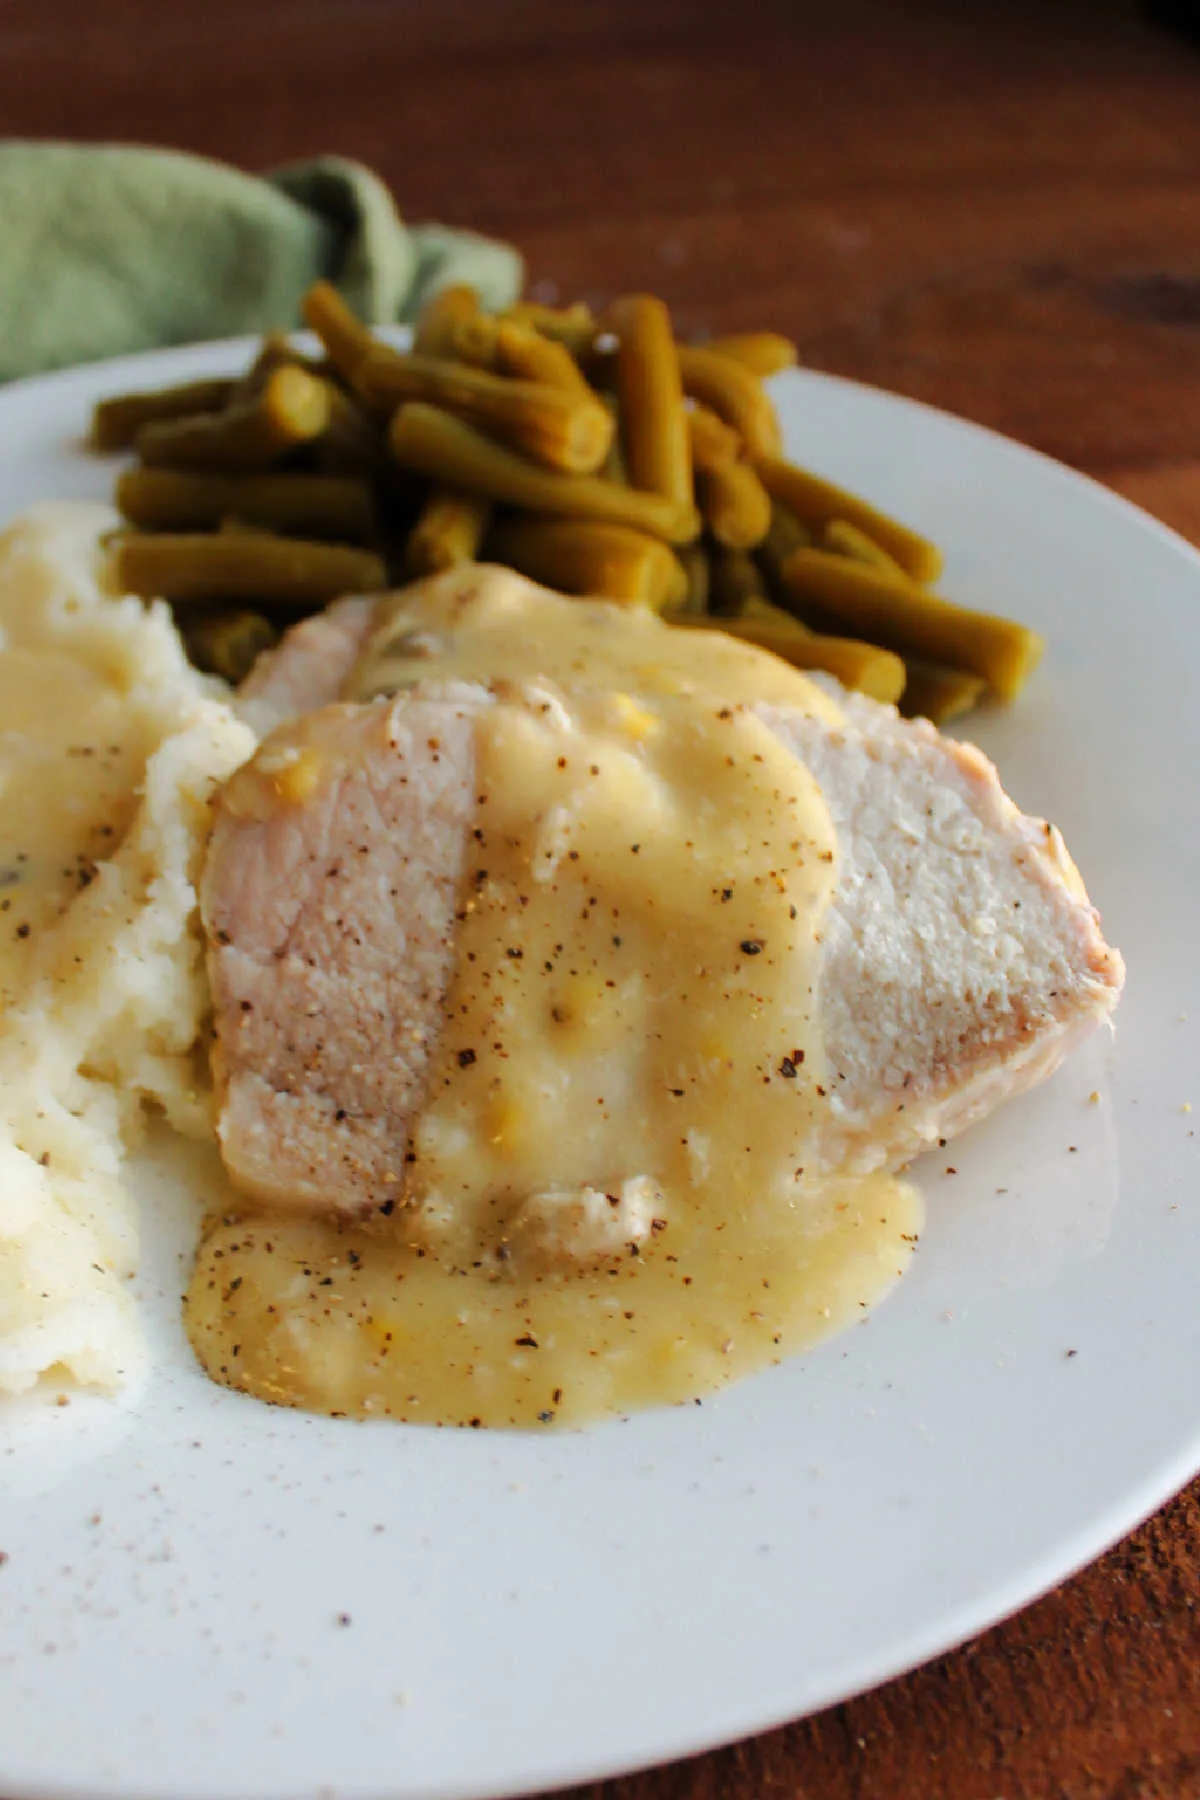 Close up of pork loin slices with creamy gravy over the top.